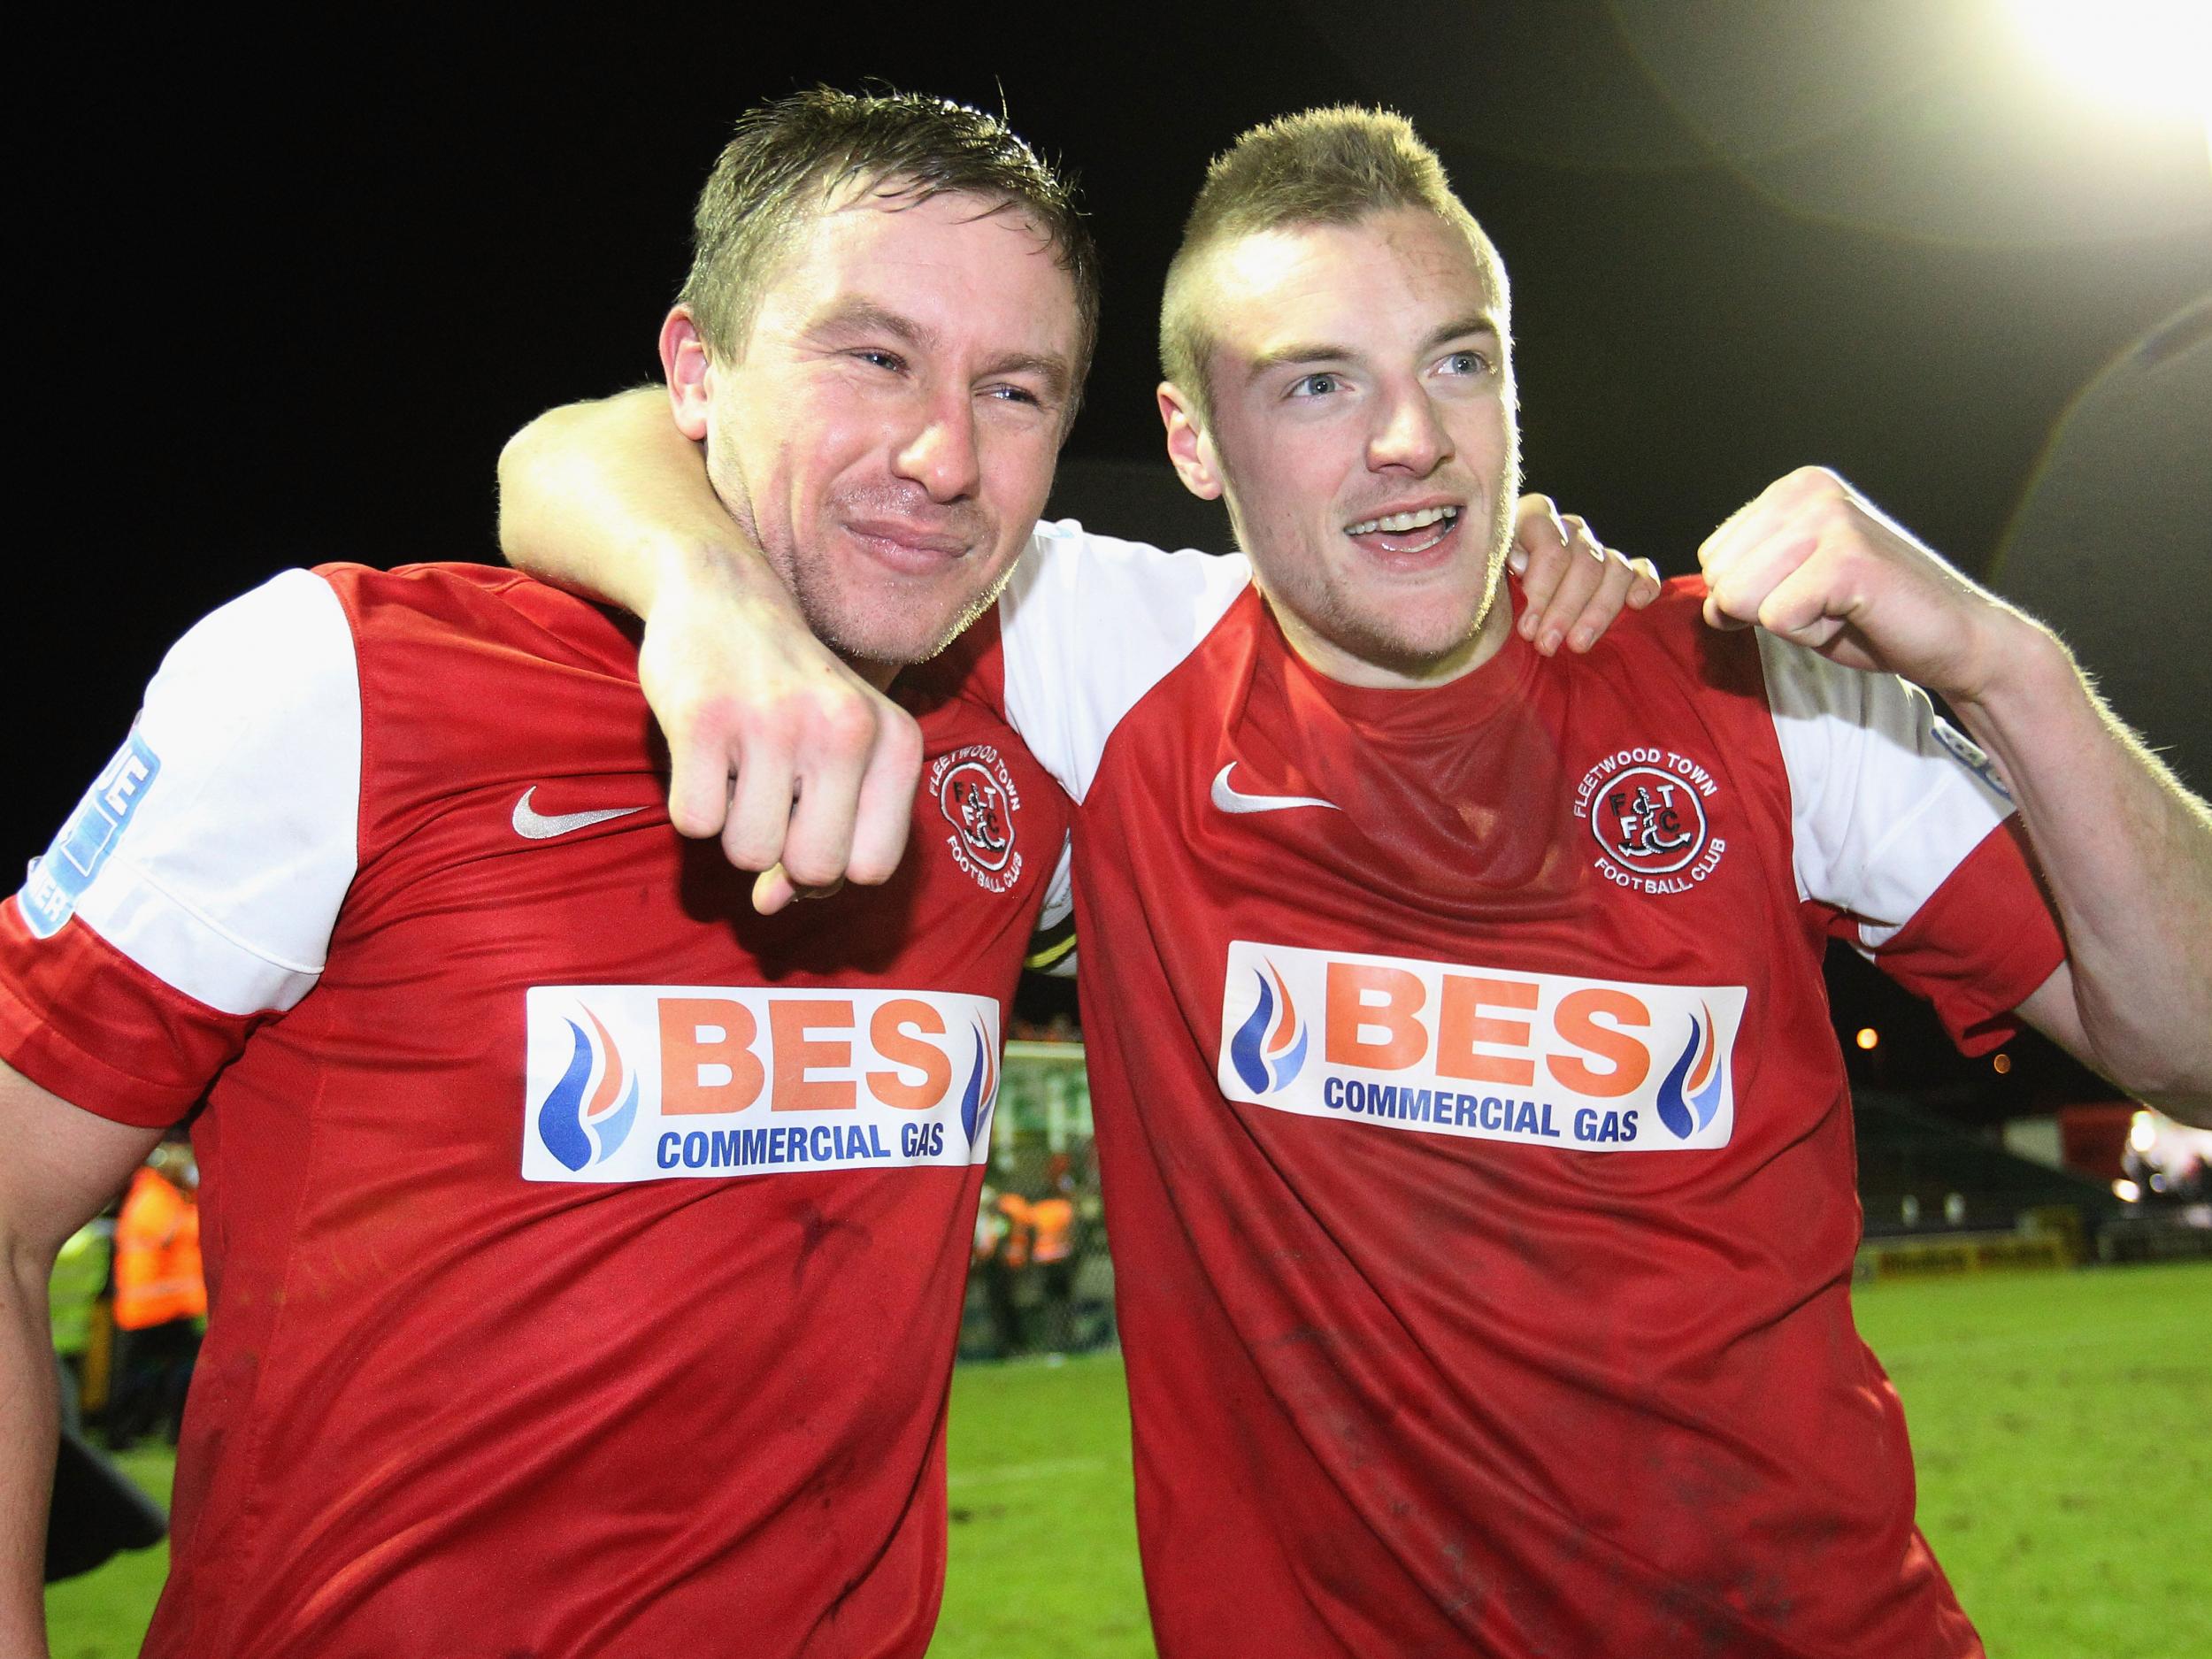 Jamie Vardy's goal propelled Fleetwood Town to the Football League back in 2012